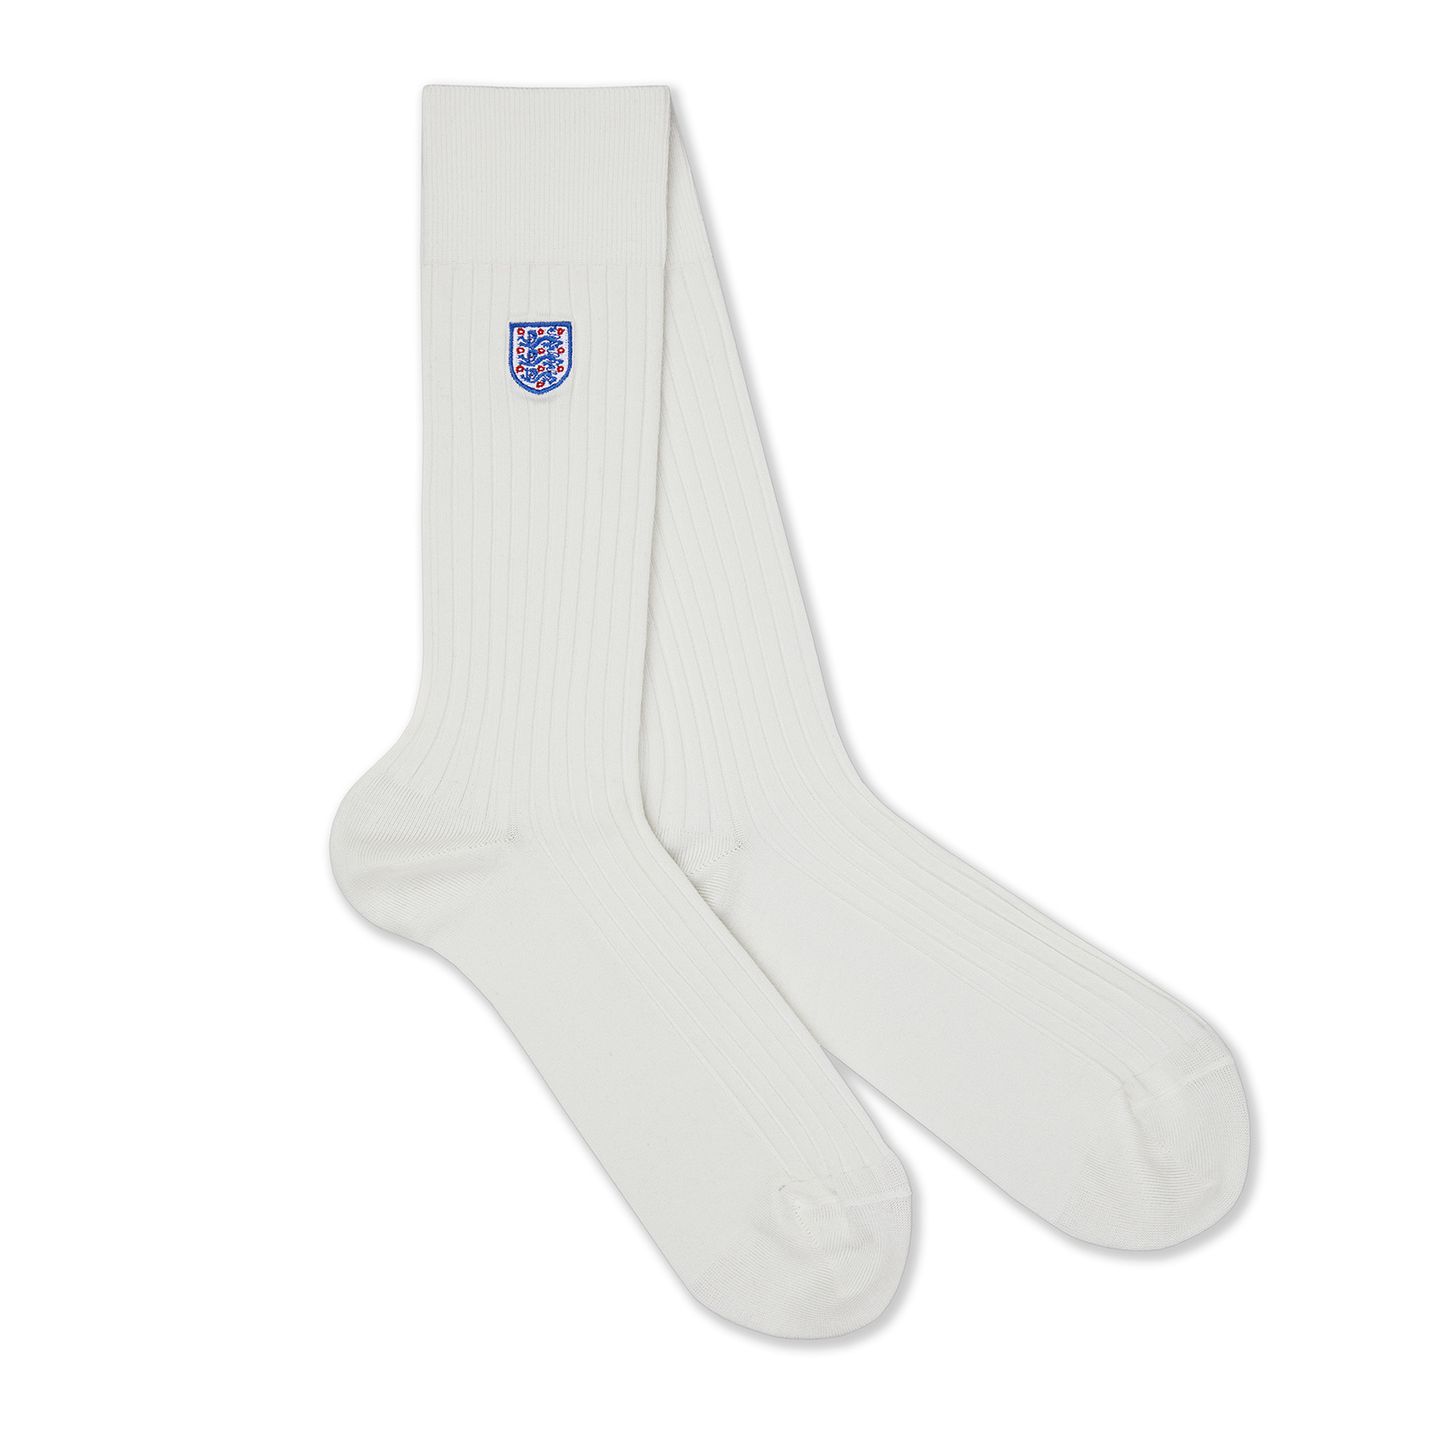 A pair of England socks in white